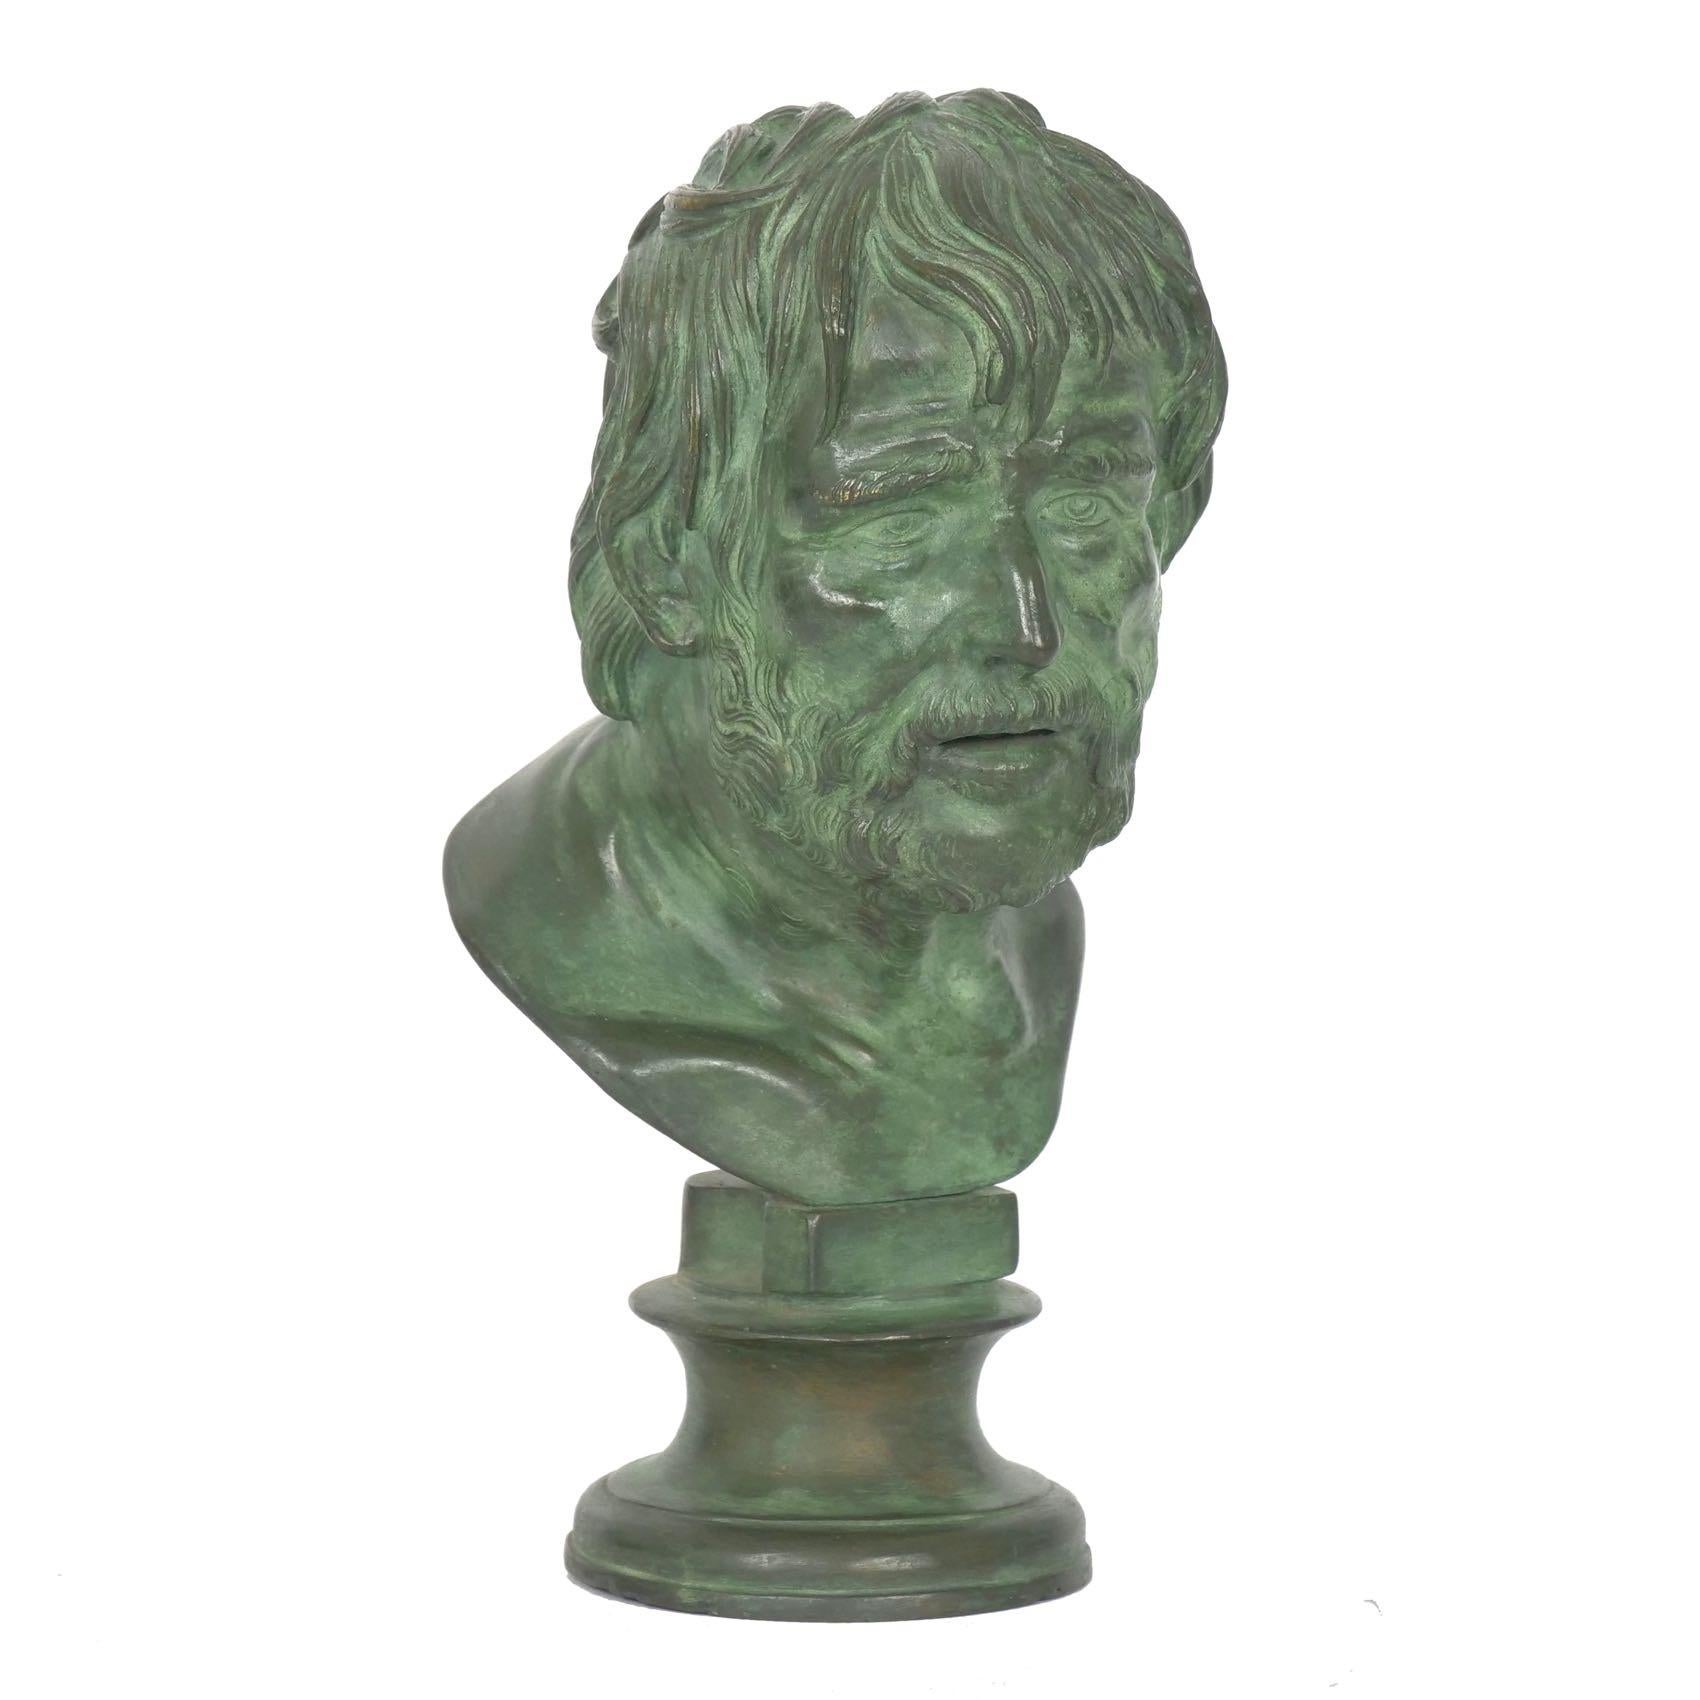 A fine 19th century Grand Tour bronze sculpture that was cast after the Pseudo-Seneca, this model is beautifully cast with fine hand chasing of the surfaces and chiselling of the details. Note the impeccably formed hair and his fine skin throughout,